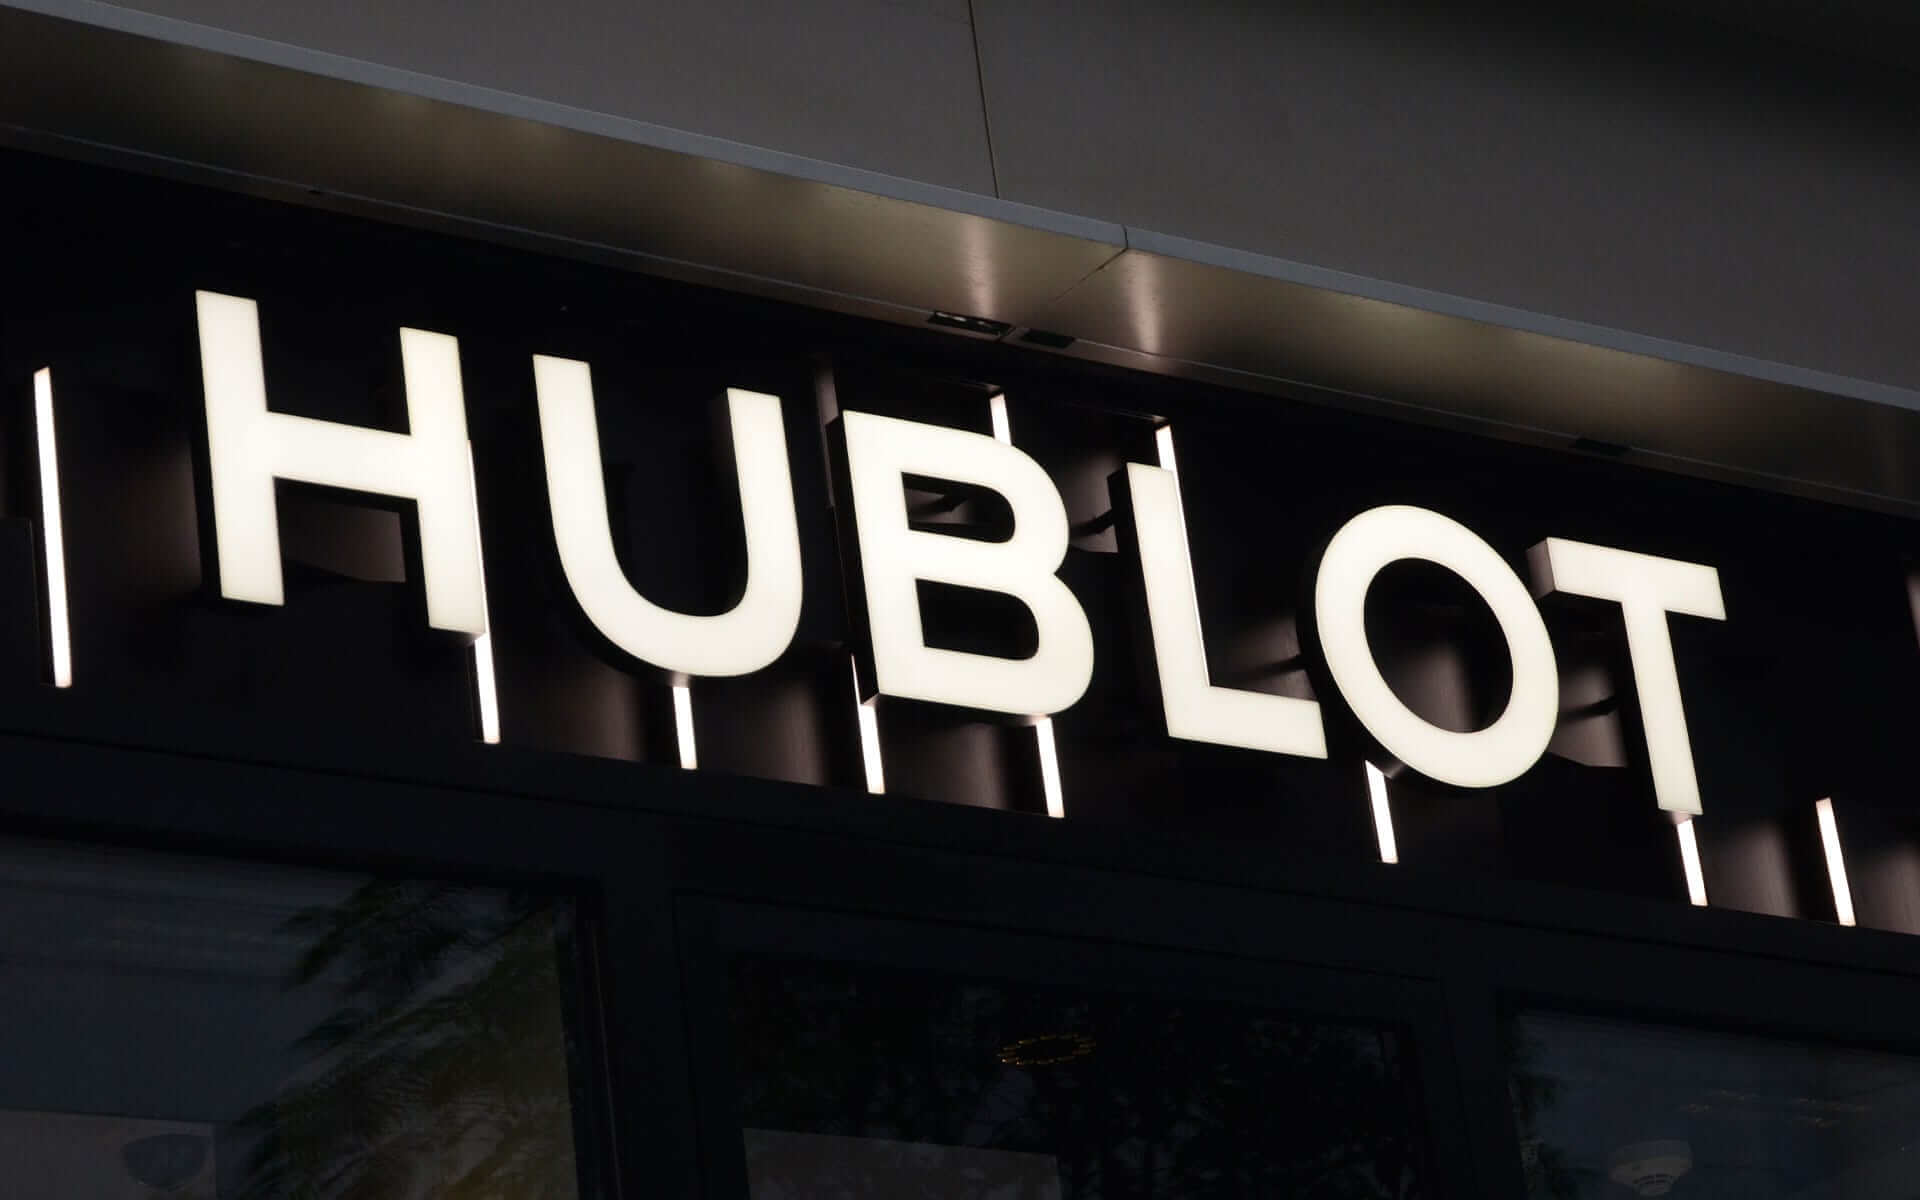 Trimless Face-lit Metal Channel Letters for Hublot